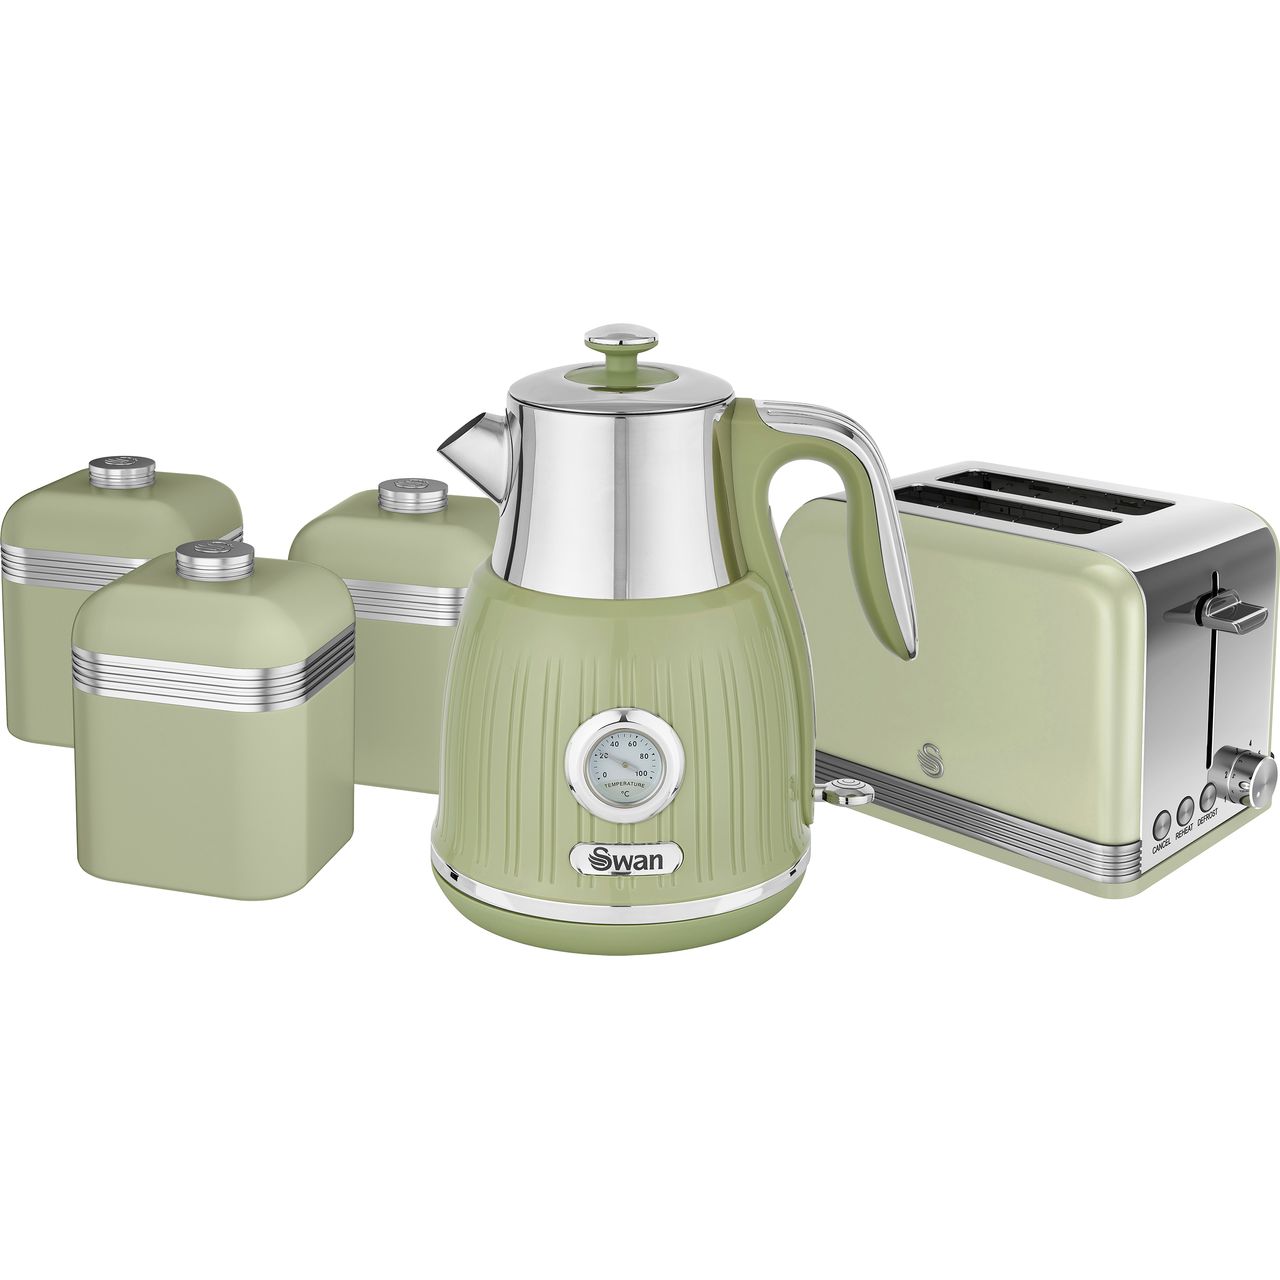 Swan Retro STRP3021GN Kettle And Toaster Sets Review